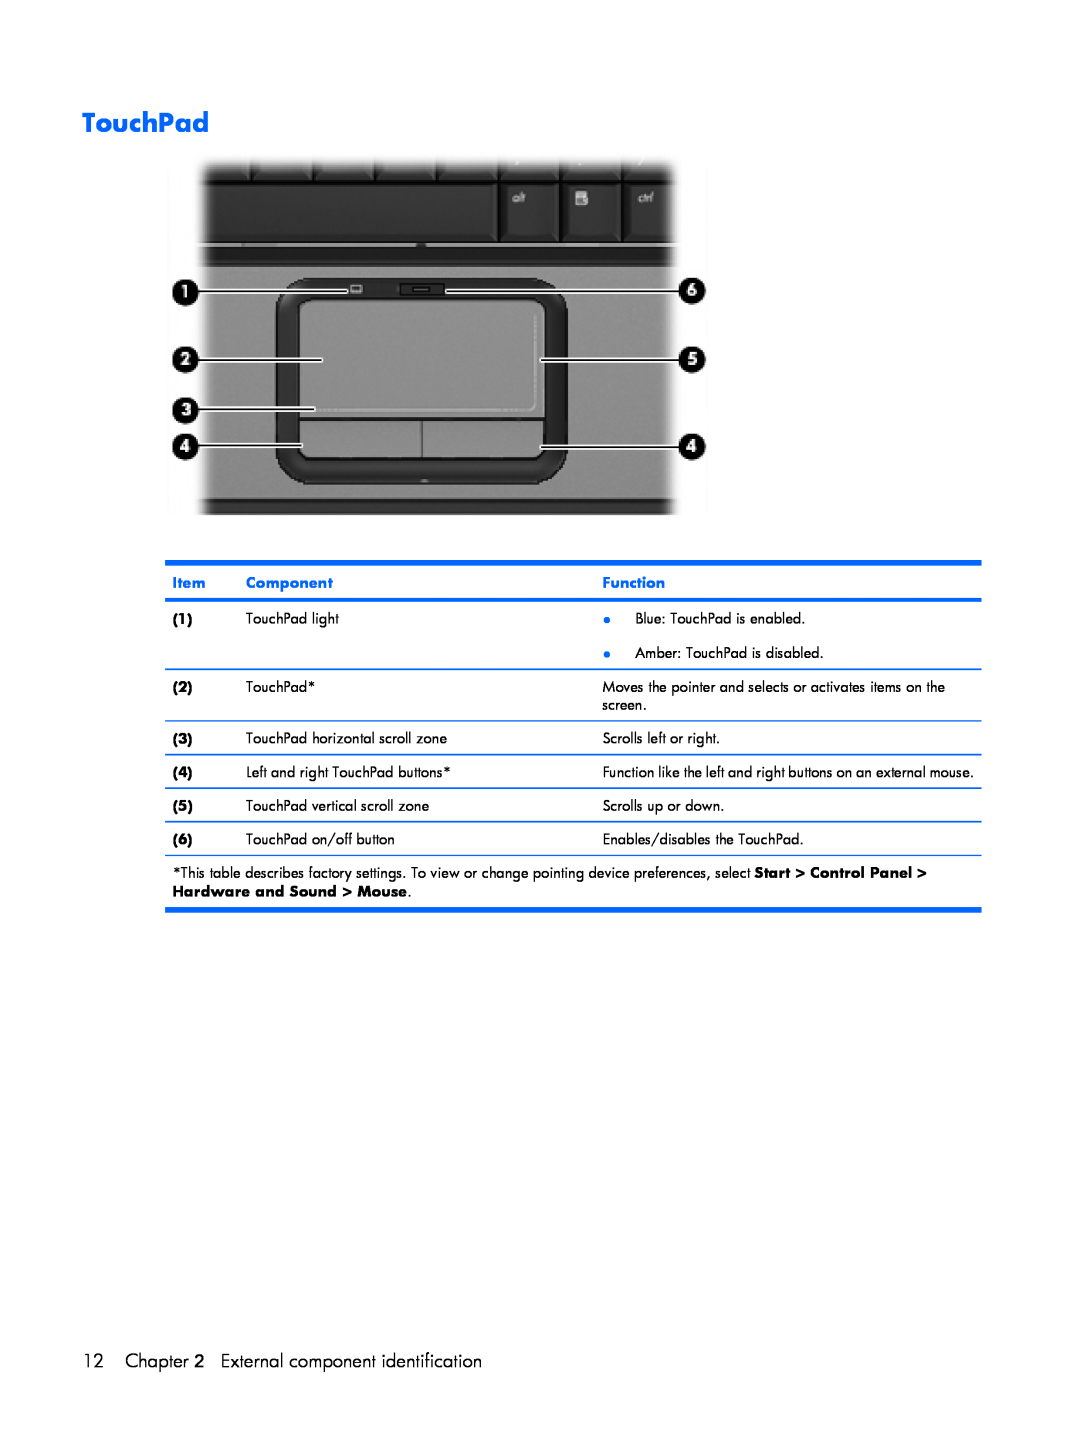 HP V3907AU, V3523TU, V3930TU, V3931TU, V3929TU, V3928TU, V3925TU, V3923TU, V3922TU TouchPad, External component identification 